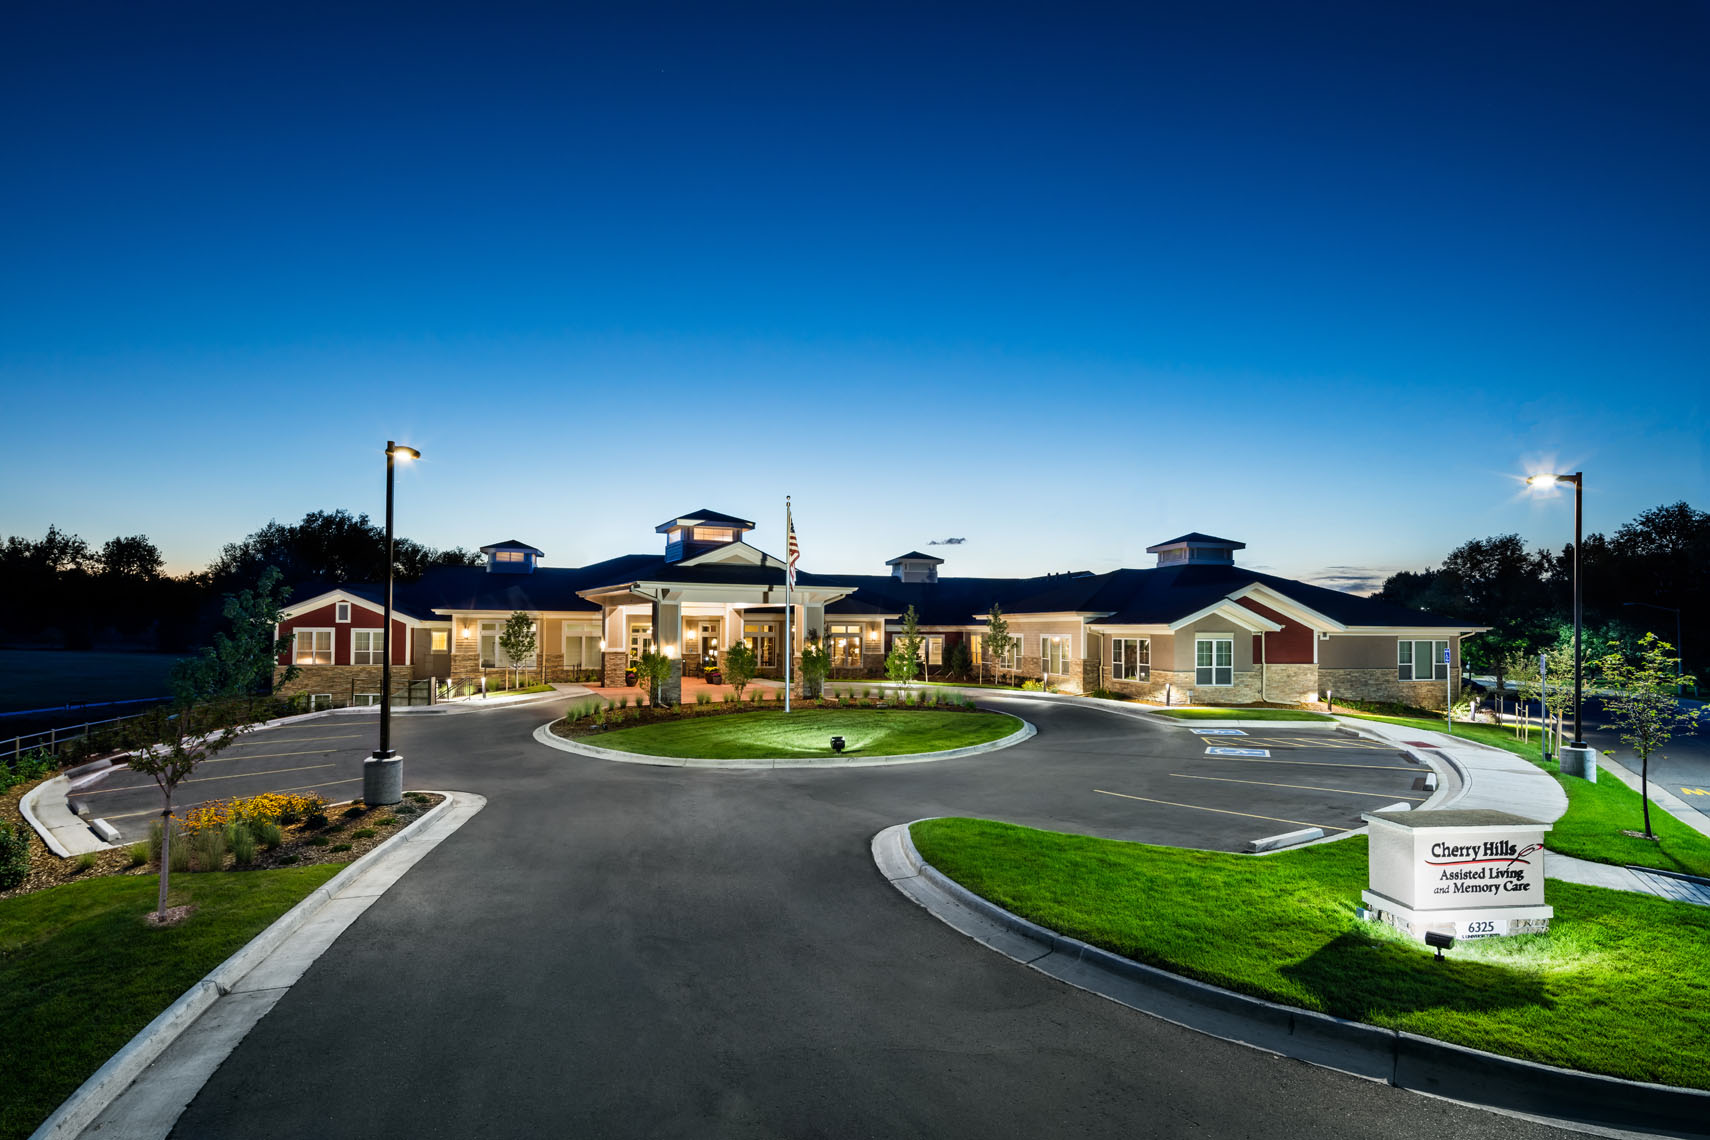 Senior living retirement facility /building photographed for the architect and interior designer in denver colorado